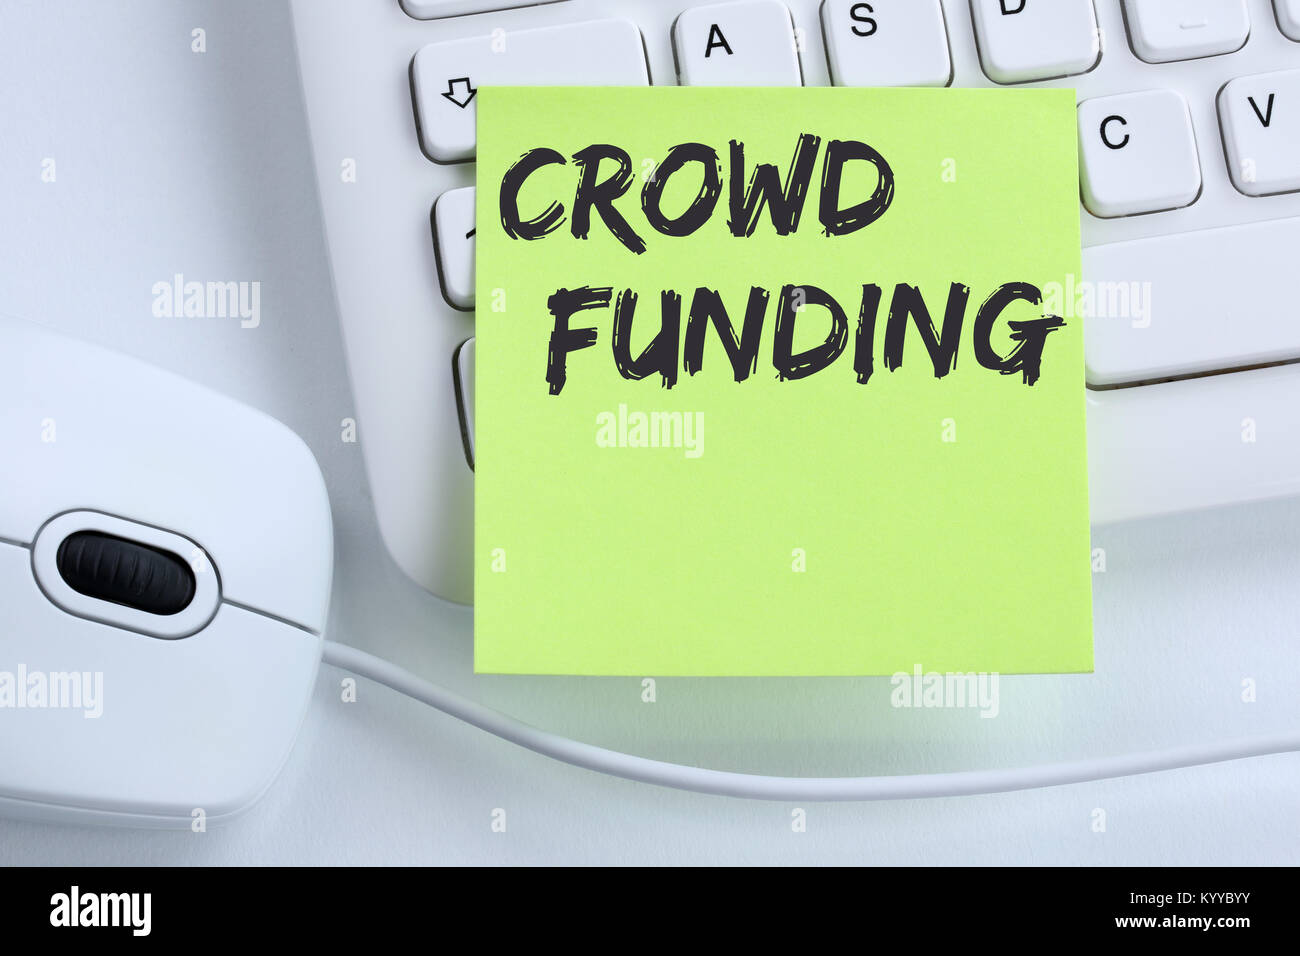 Crowd funding crowdfunding collecting money online investment internet business concept mouse desk computer keyboard Stock Photo